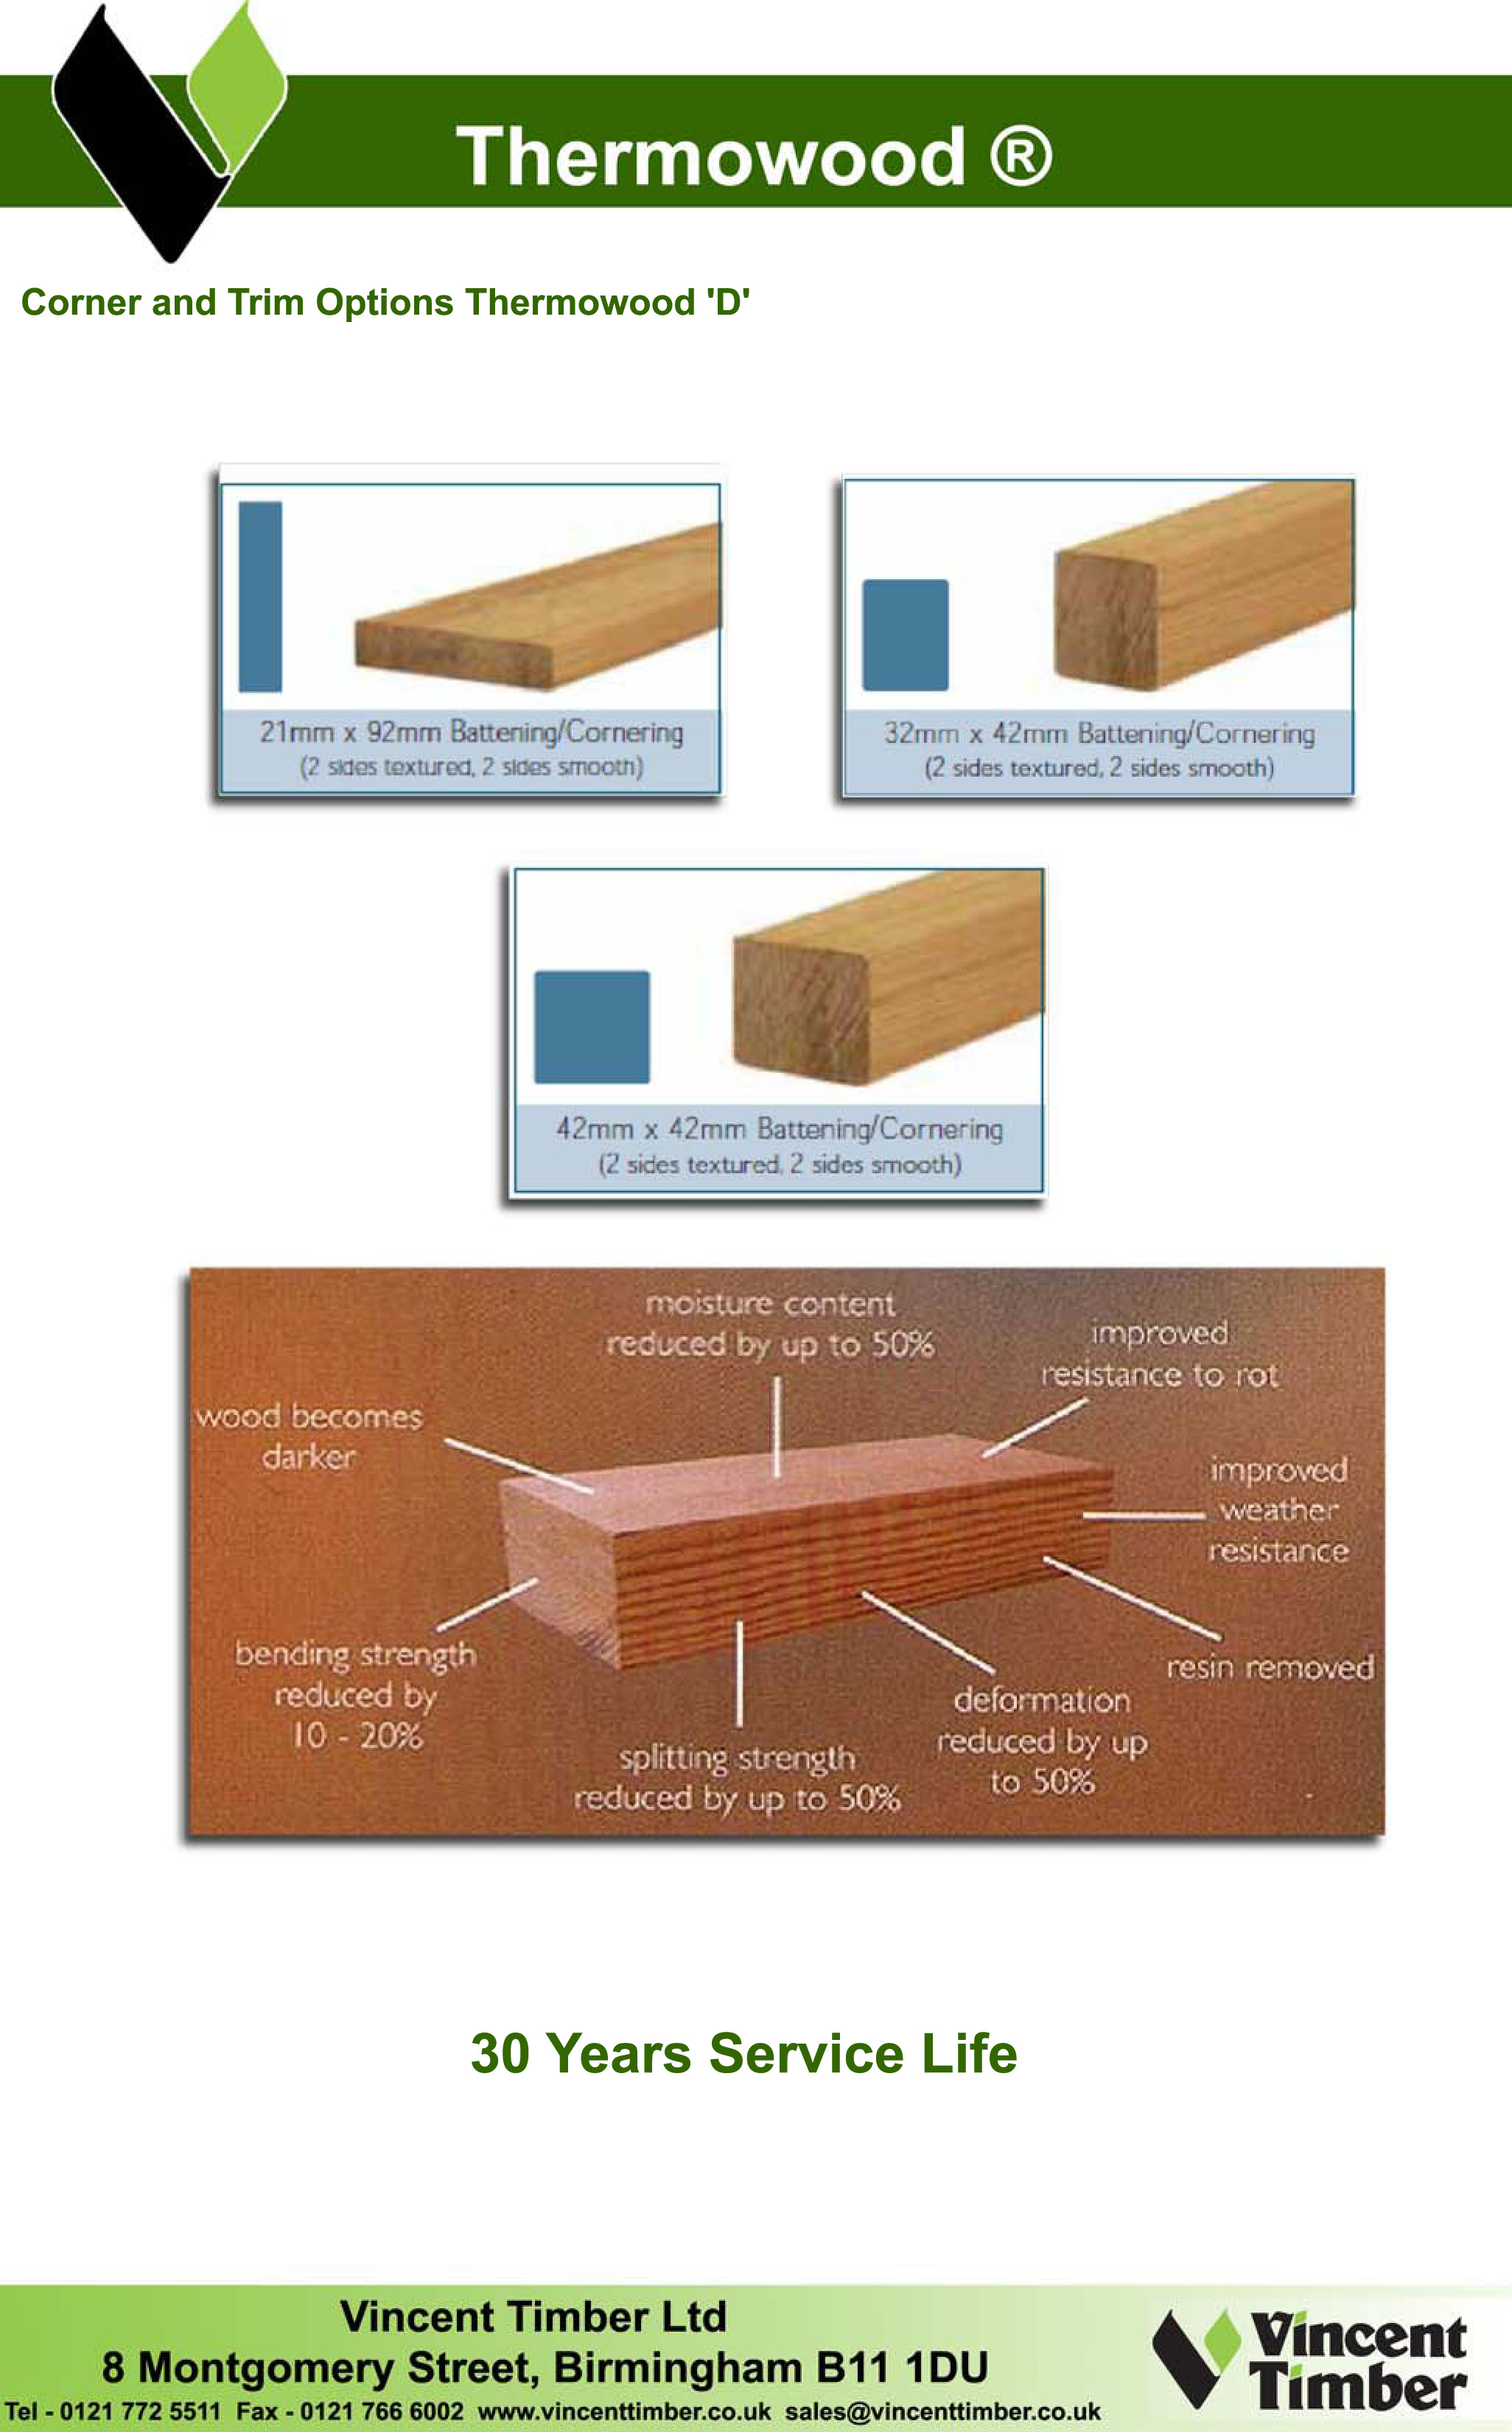 Profiles of Thermowood